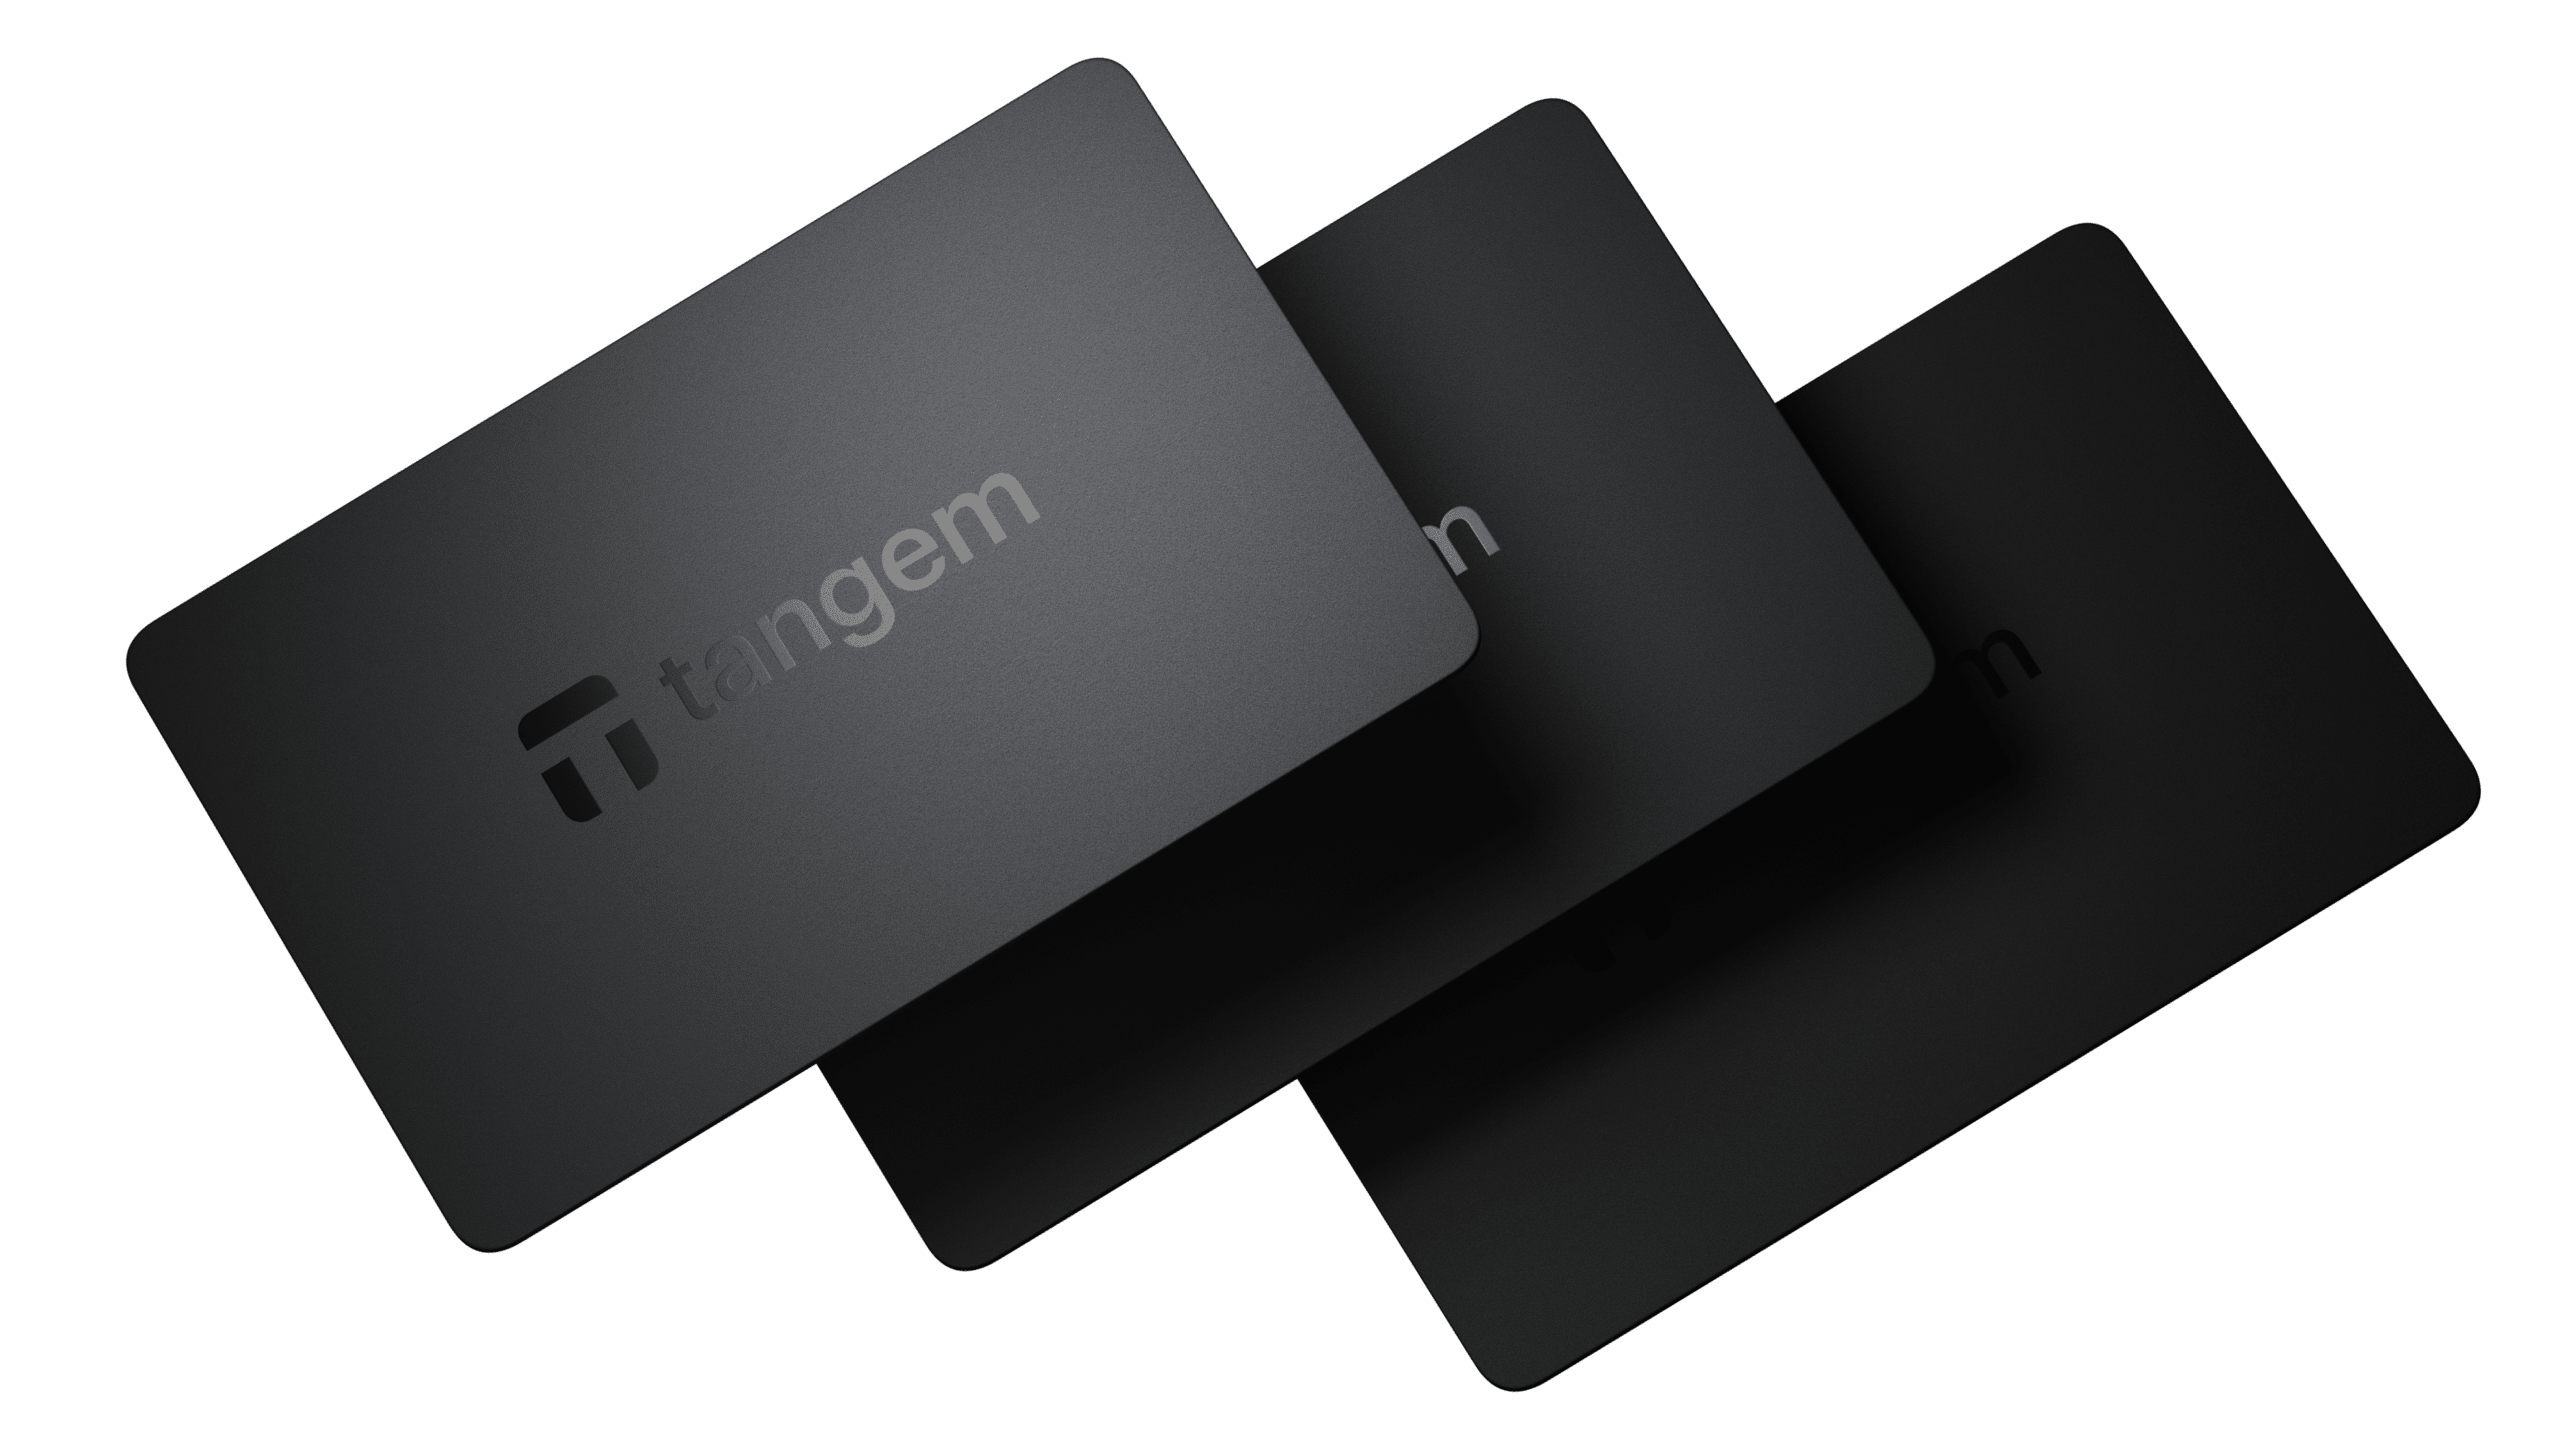 Tangem: a leader in crypto hardware wallets